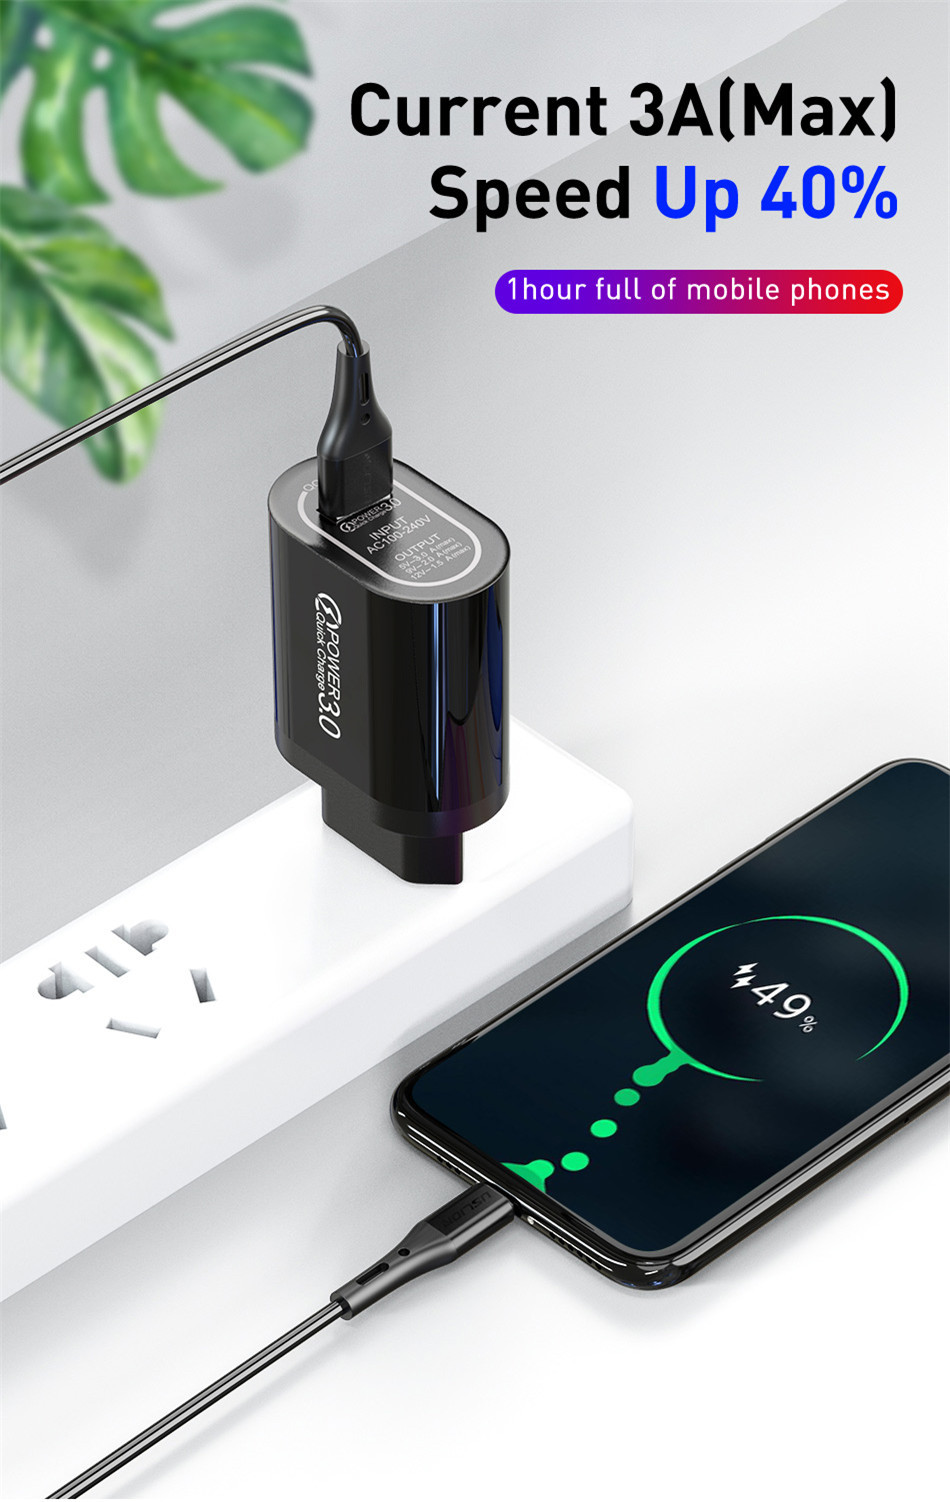 Bakeey-USB-Charger-QC30-Universal-Fast-Charging-USB-Charger-For-iPhone-XS-11-Pro-Mi10-Note-9S-1686568-2